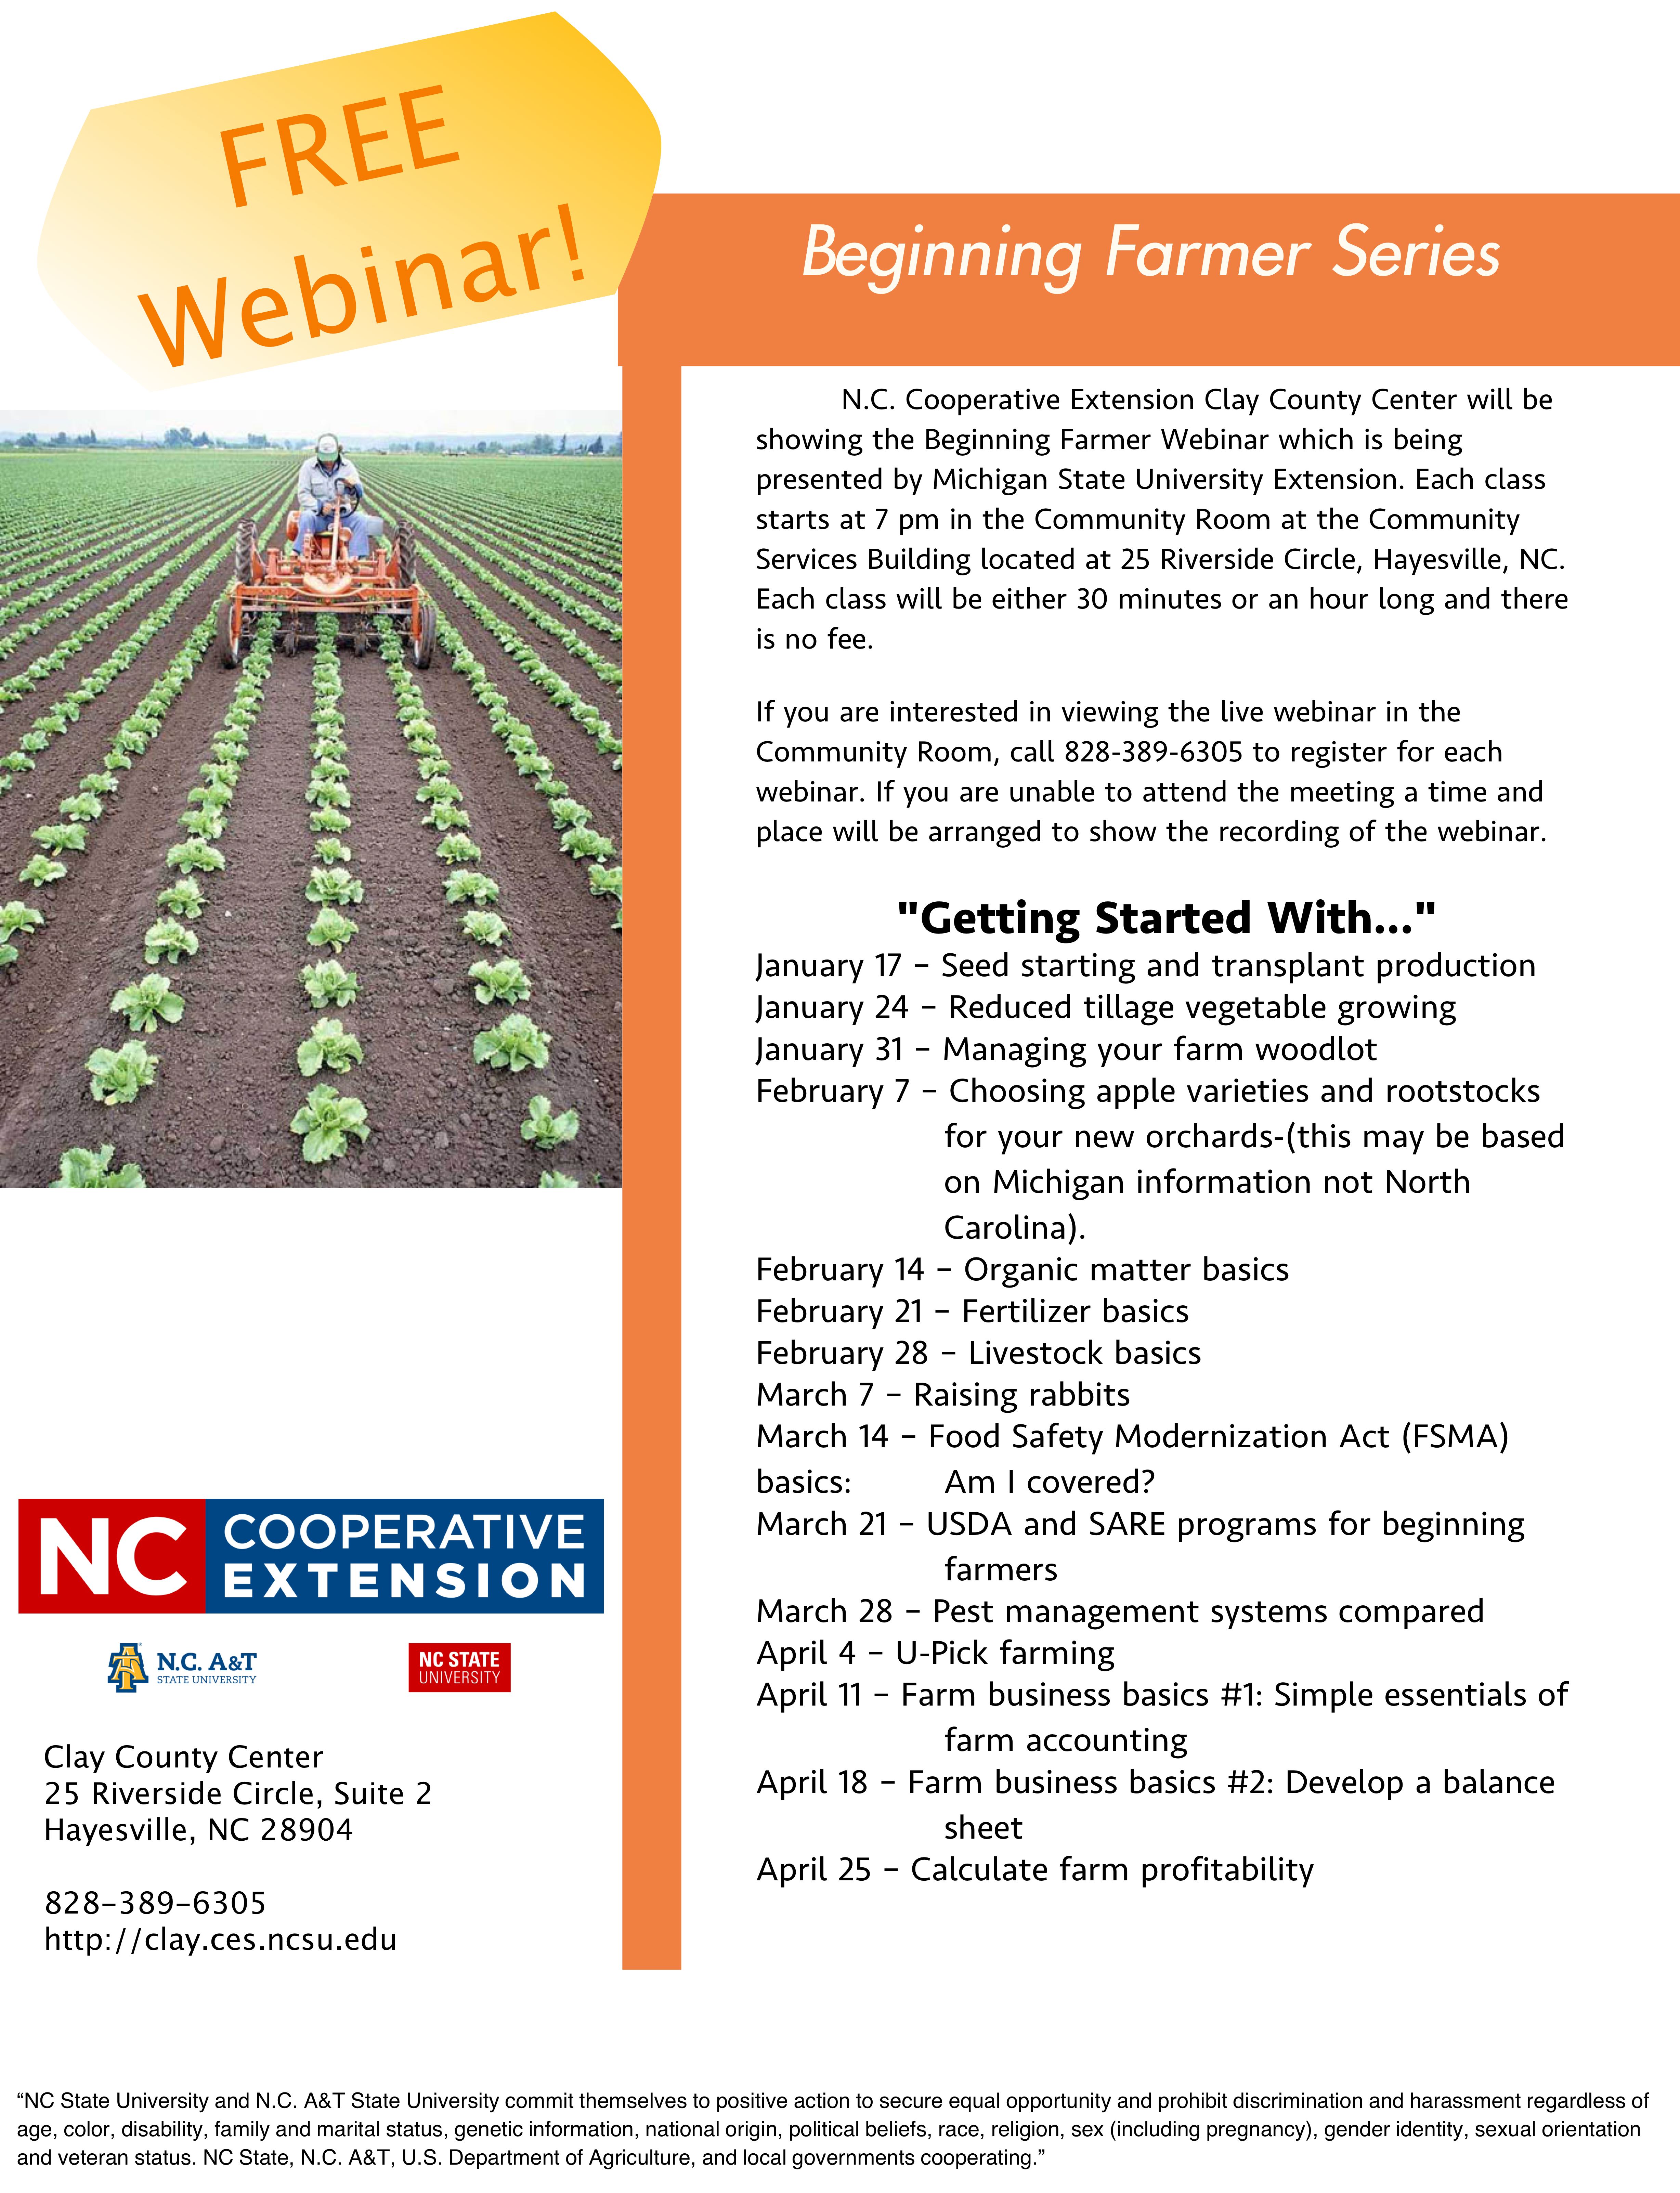 A flyer to promote the Beginning Farmer Webinar Series by Michigan State University.